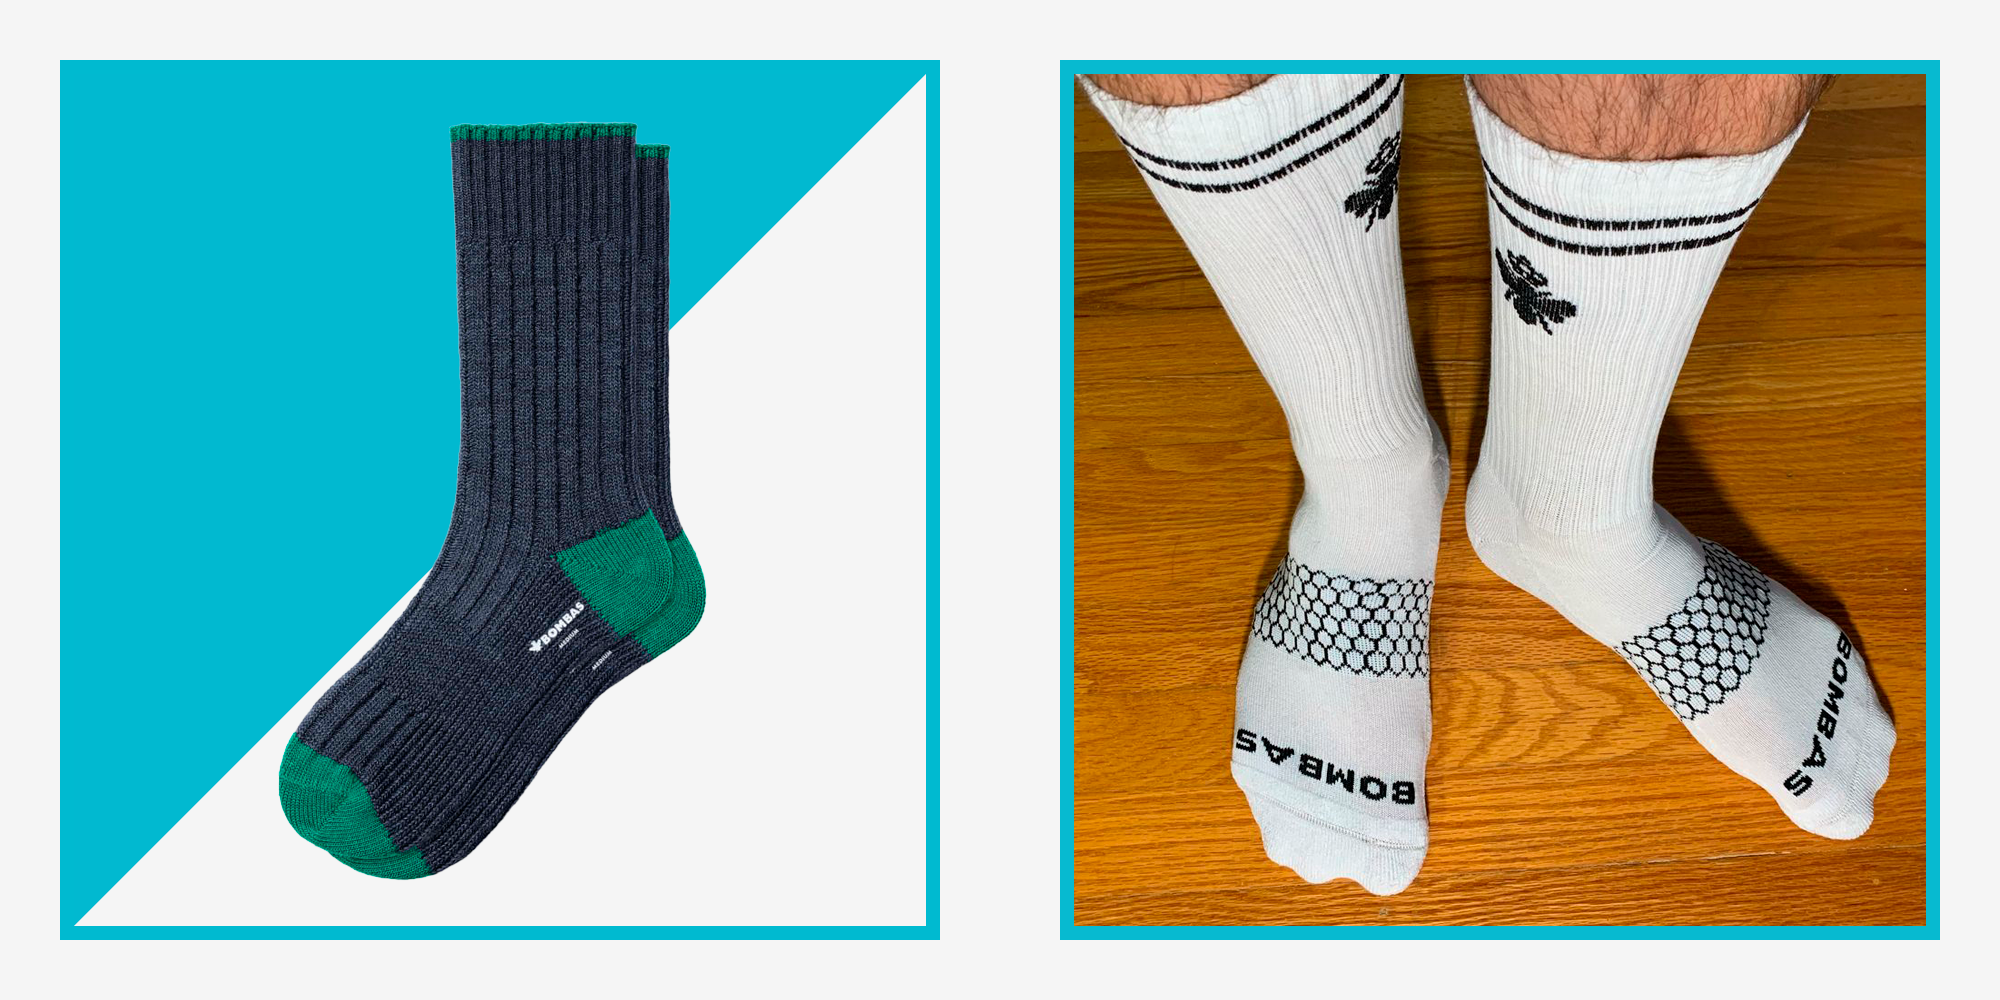 bombas running socks review : are they worth the money? - Lipgloss and  Crayons